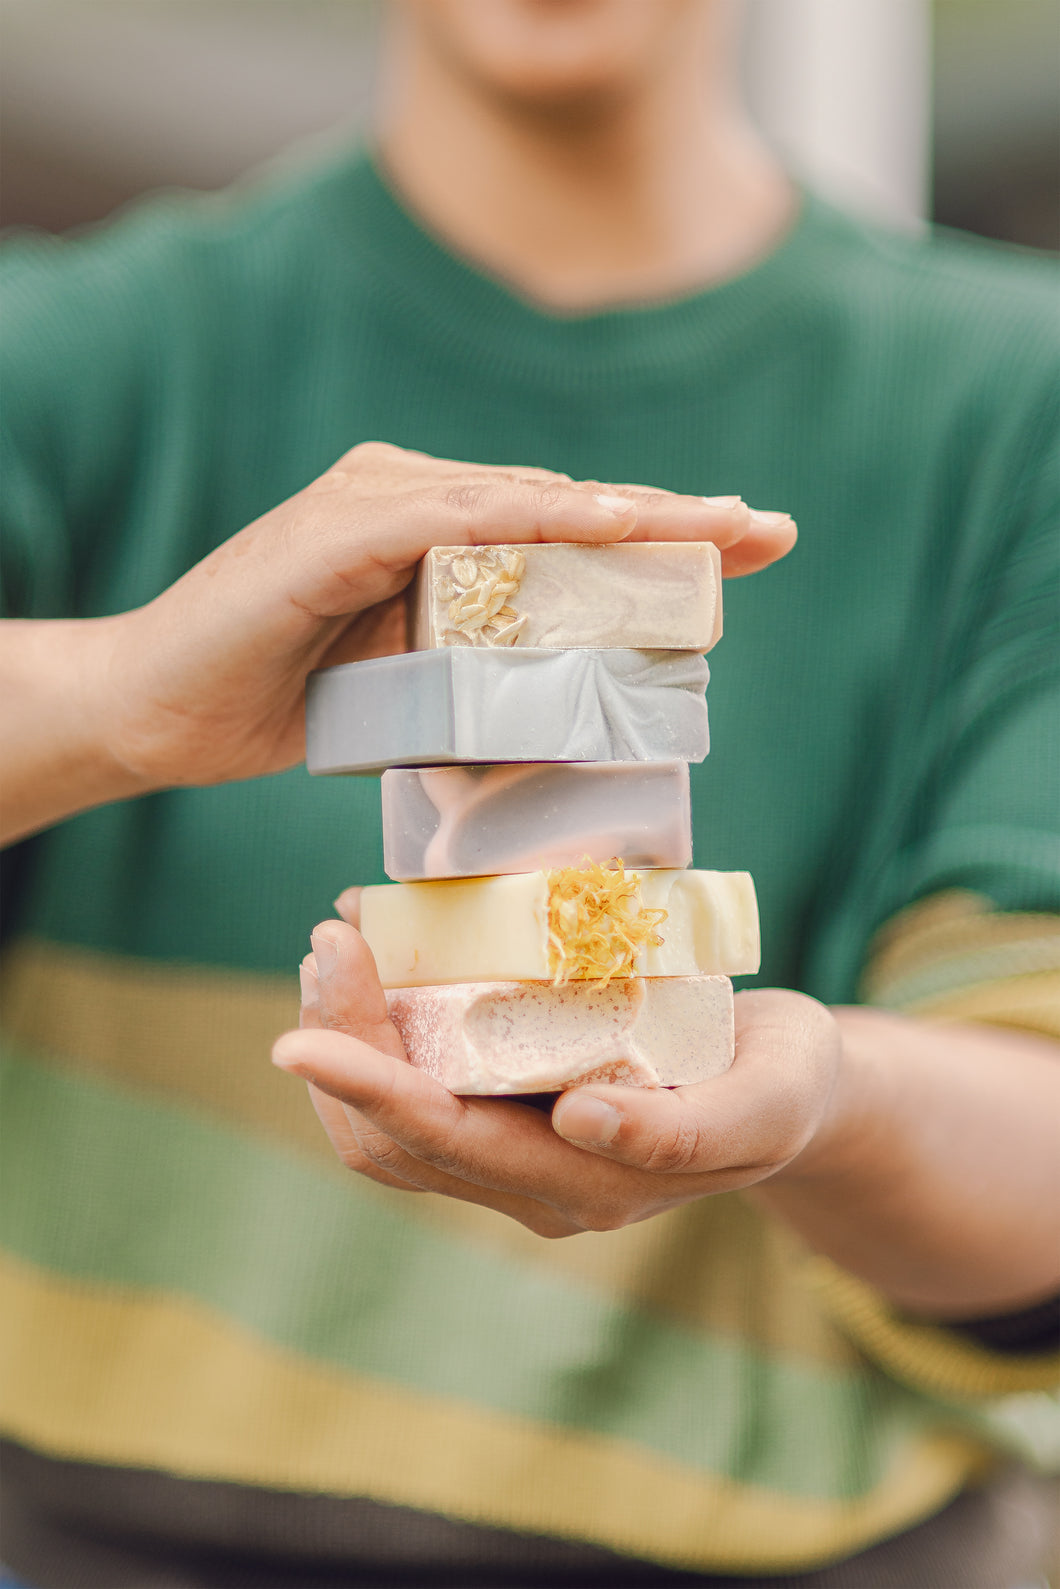 Holding a Solid Soaps stack